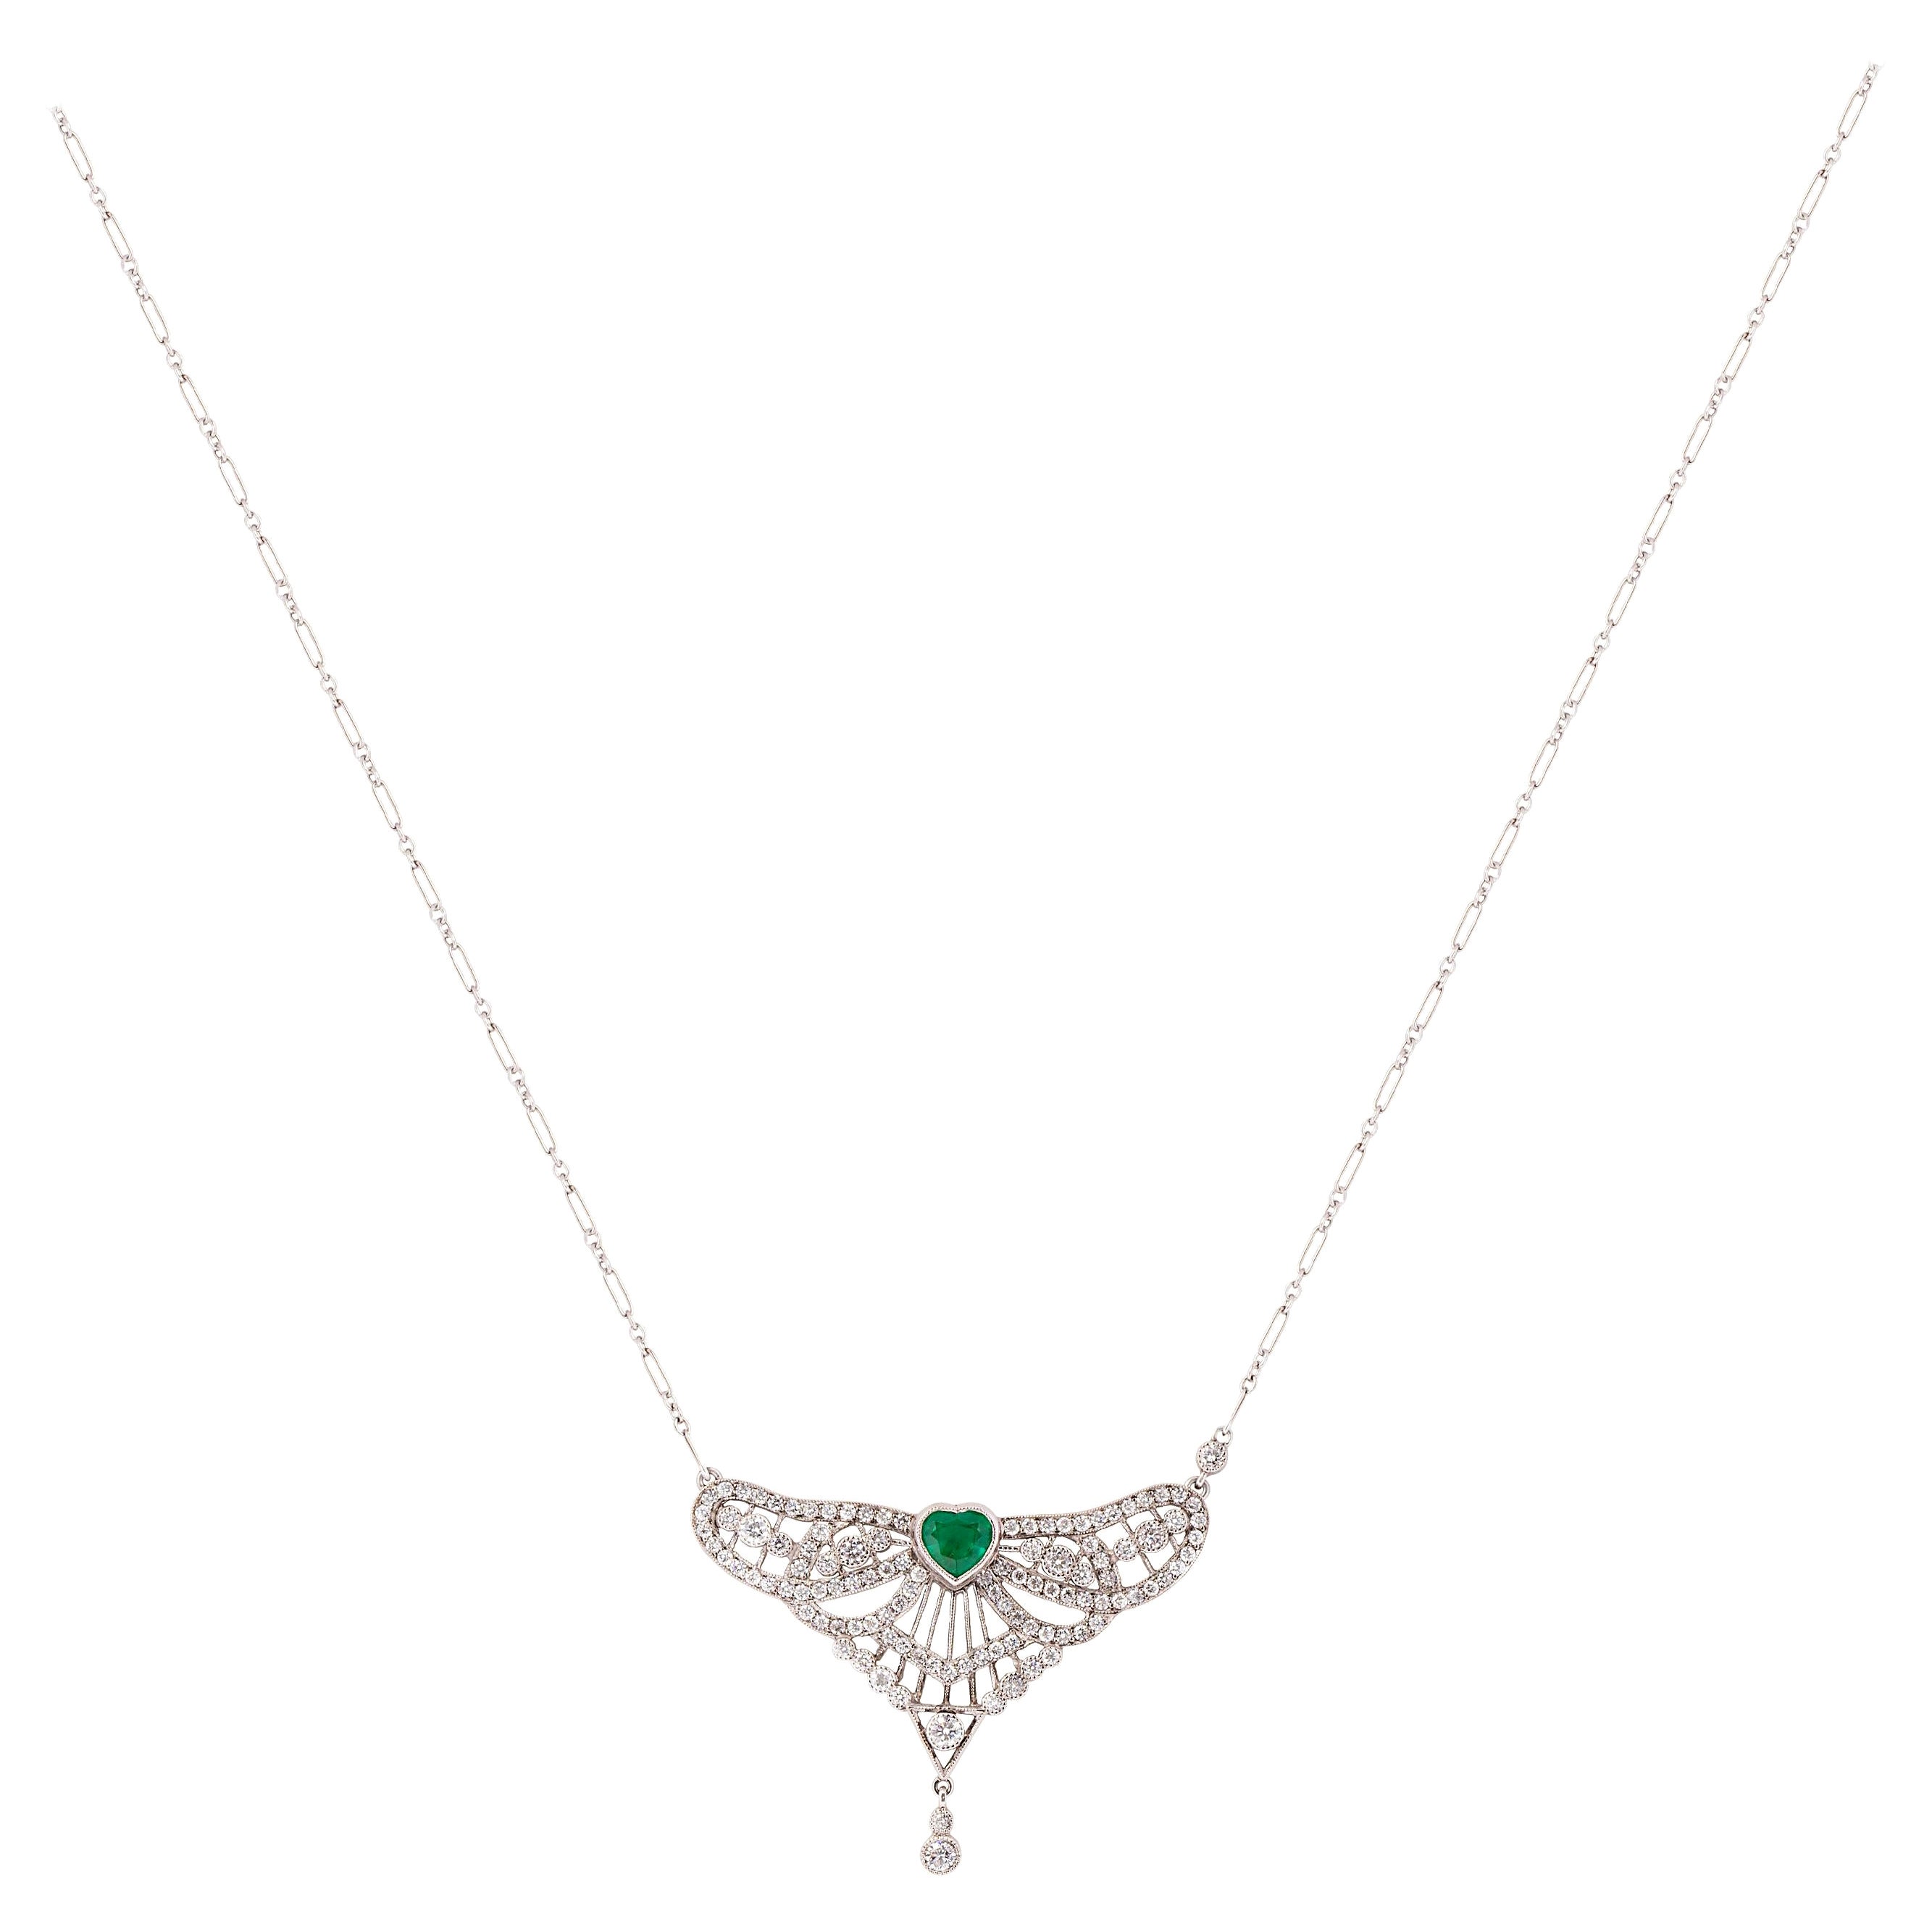 Inspired by beautiful lines and symmetry of Art Deco Era, this pendant necklace centers a 0.81 carat heart shaped emerald. The deep green emerald is accentuated by 112 round brilliant diamonds weighing 1.44 carat total weight and exquisite detail of